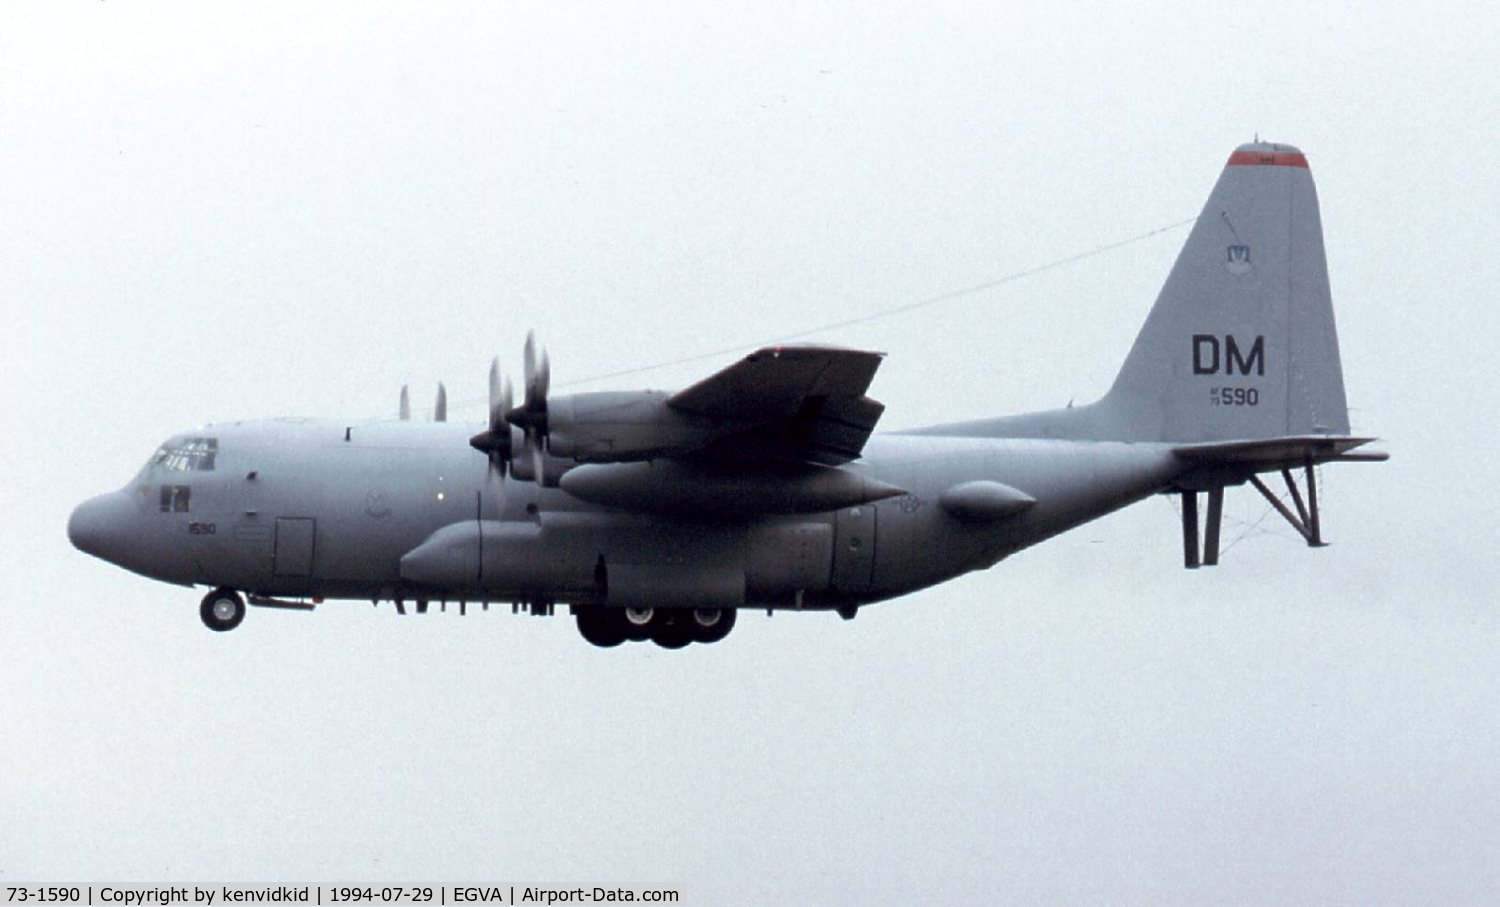 73-1590, 1973 Lockheed EC-130H Compass Call C/N 382-4554, US Air Force arriving for RIAT.